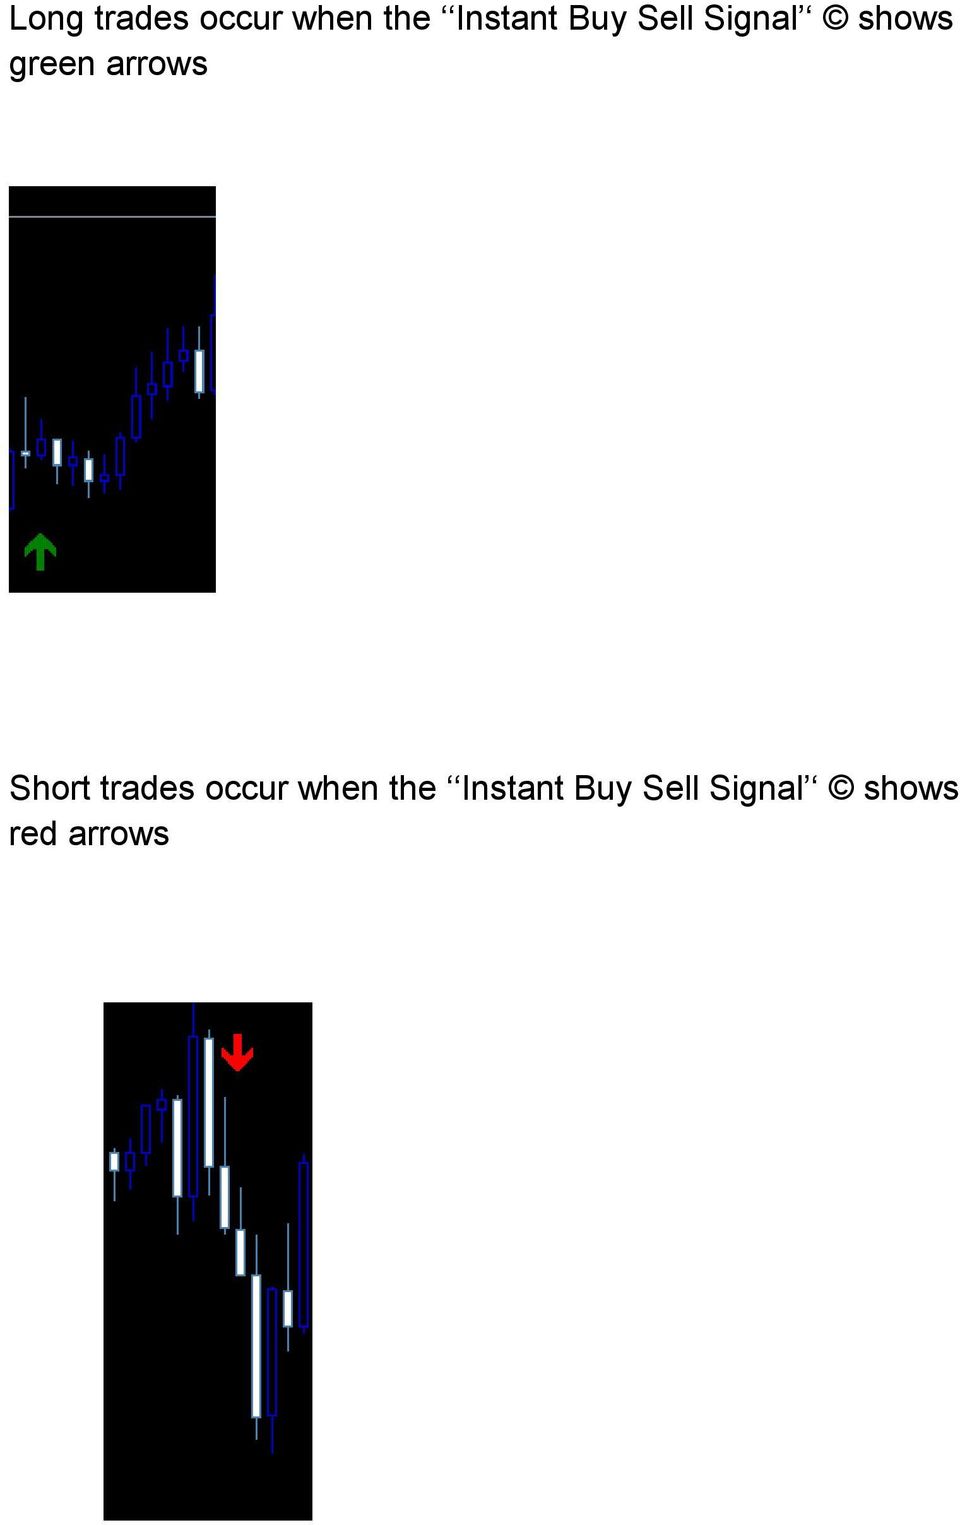 Short trades occur when the